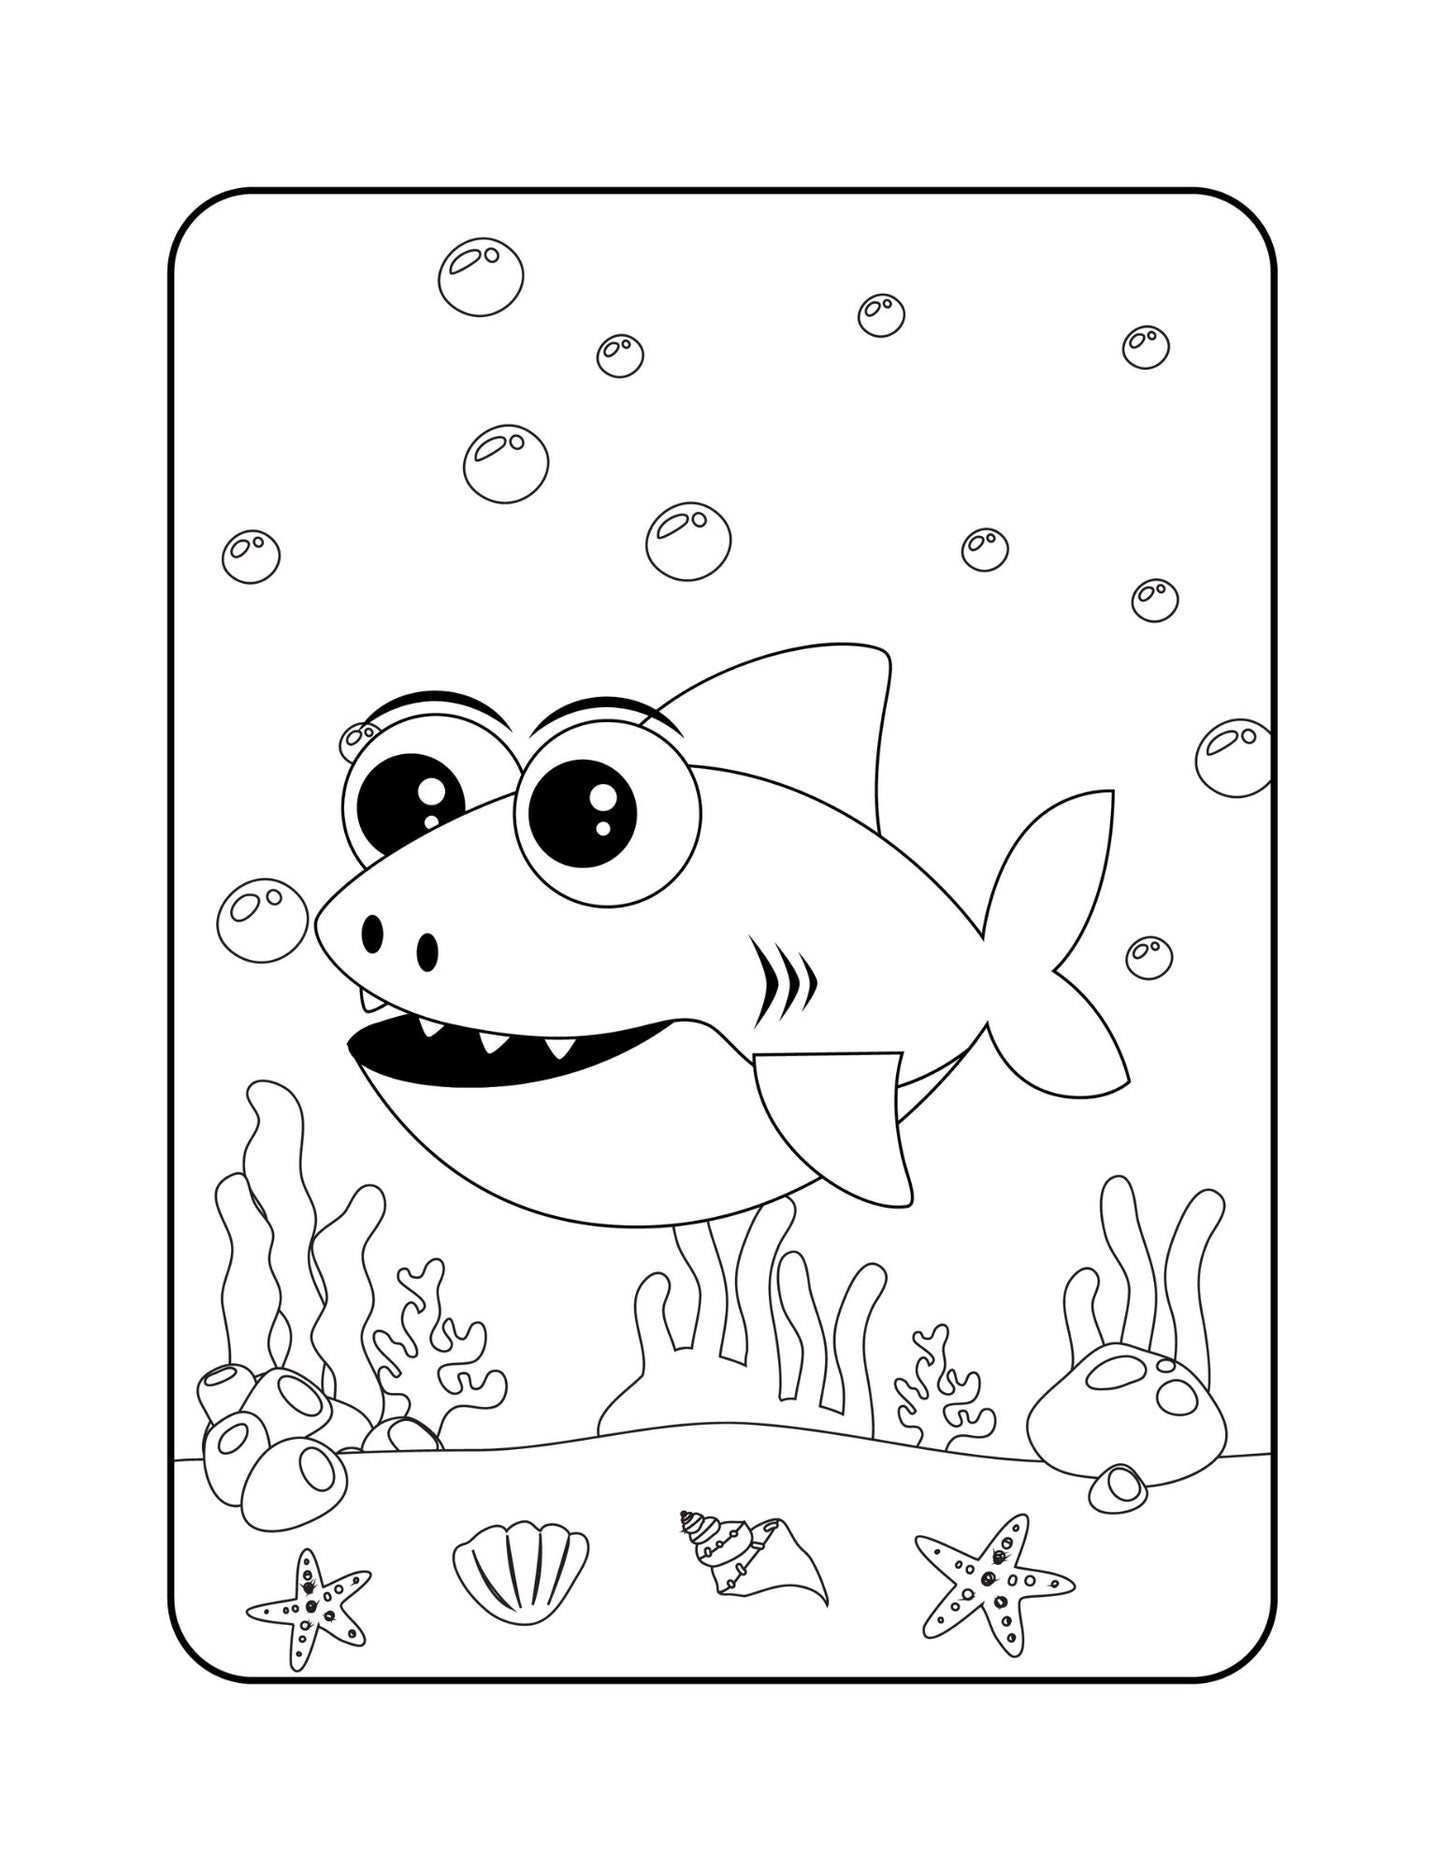 Sea Animal Coloring Book For Kids And Adults Relaxation Kids Coloring Books Coloring For Kids Child Coloring Book Coloring Activity Pages